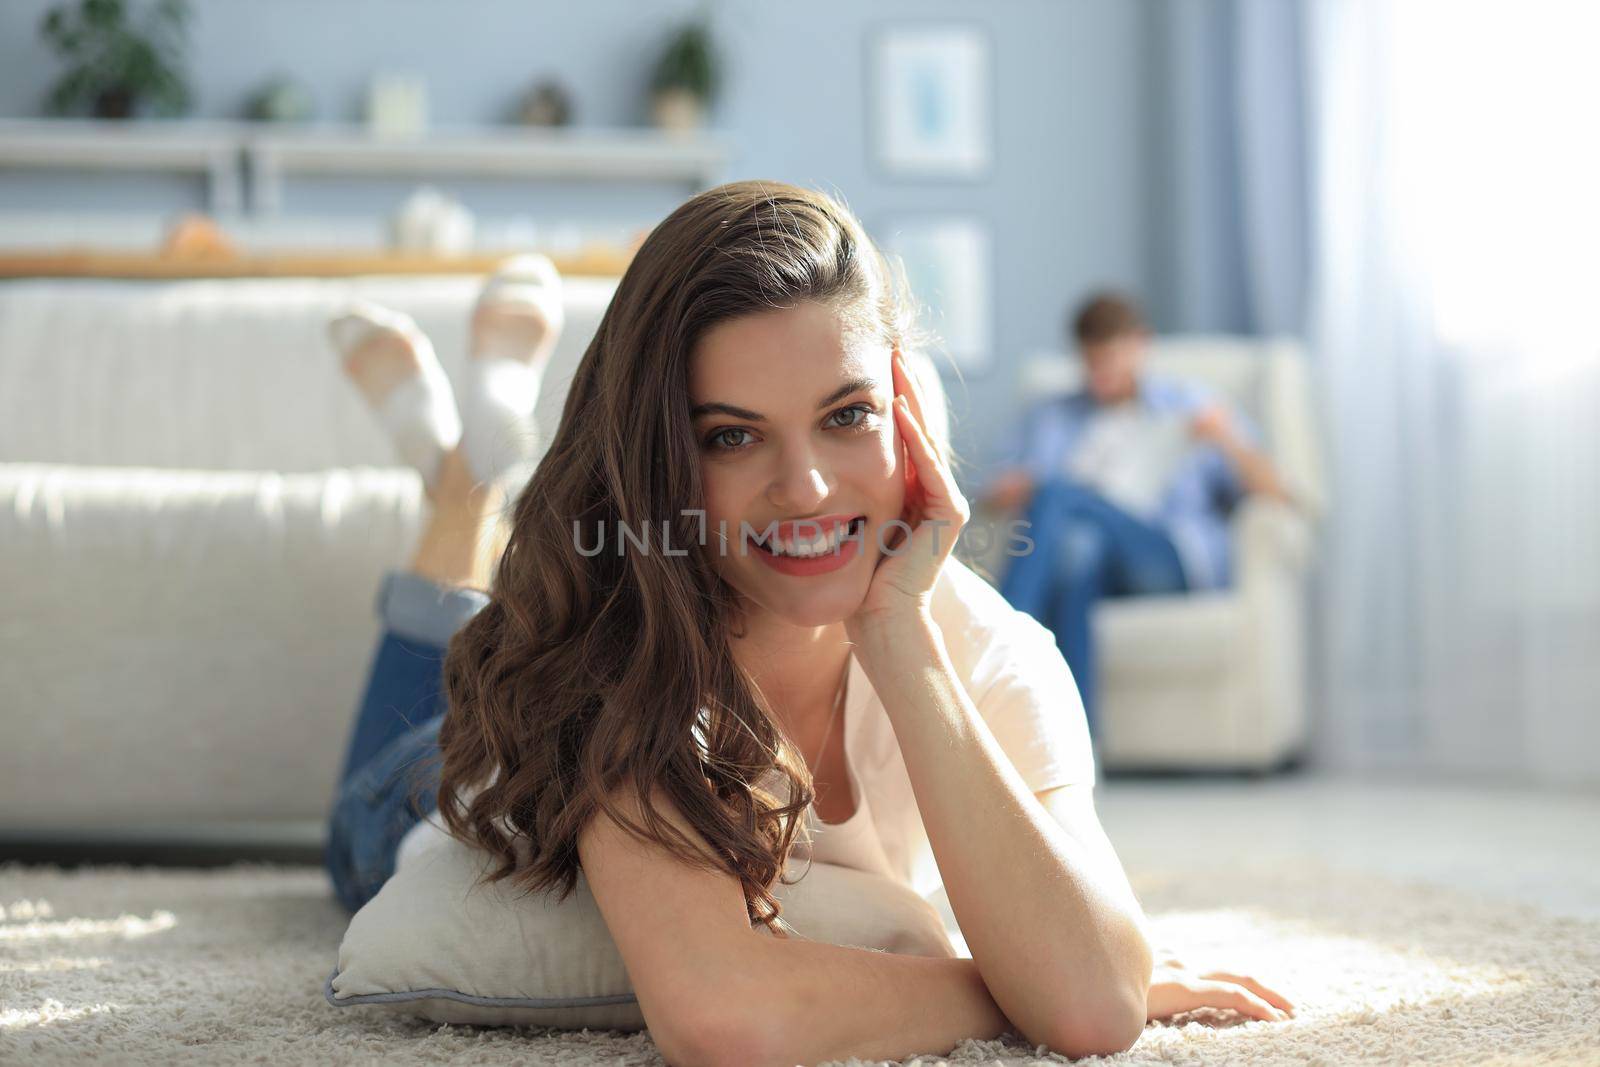 Portrait of attractive woman relaxing on floor with blurred man in background